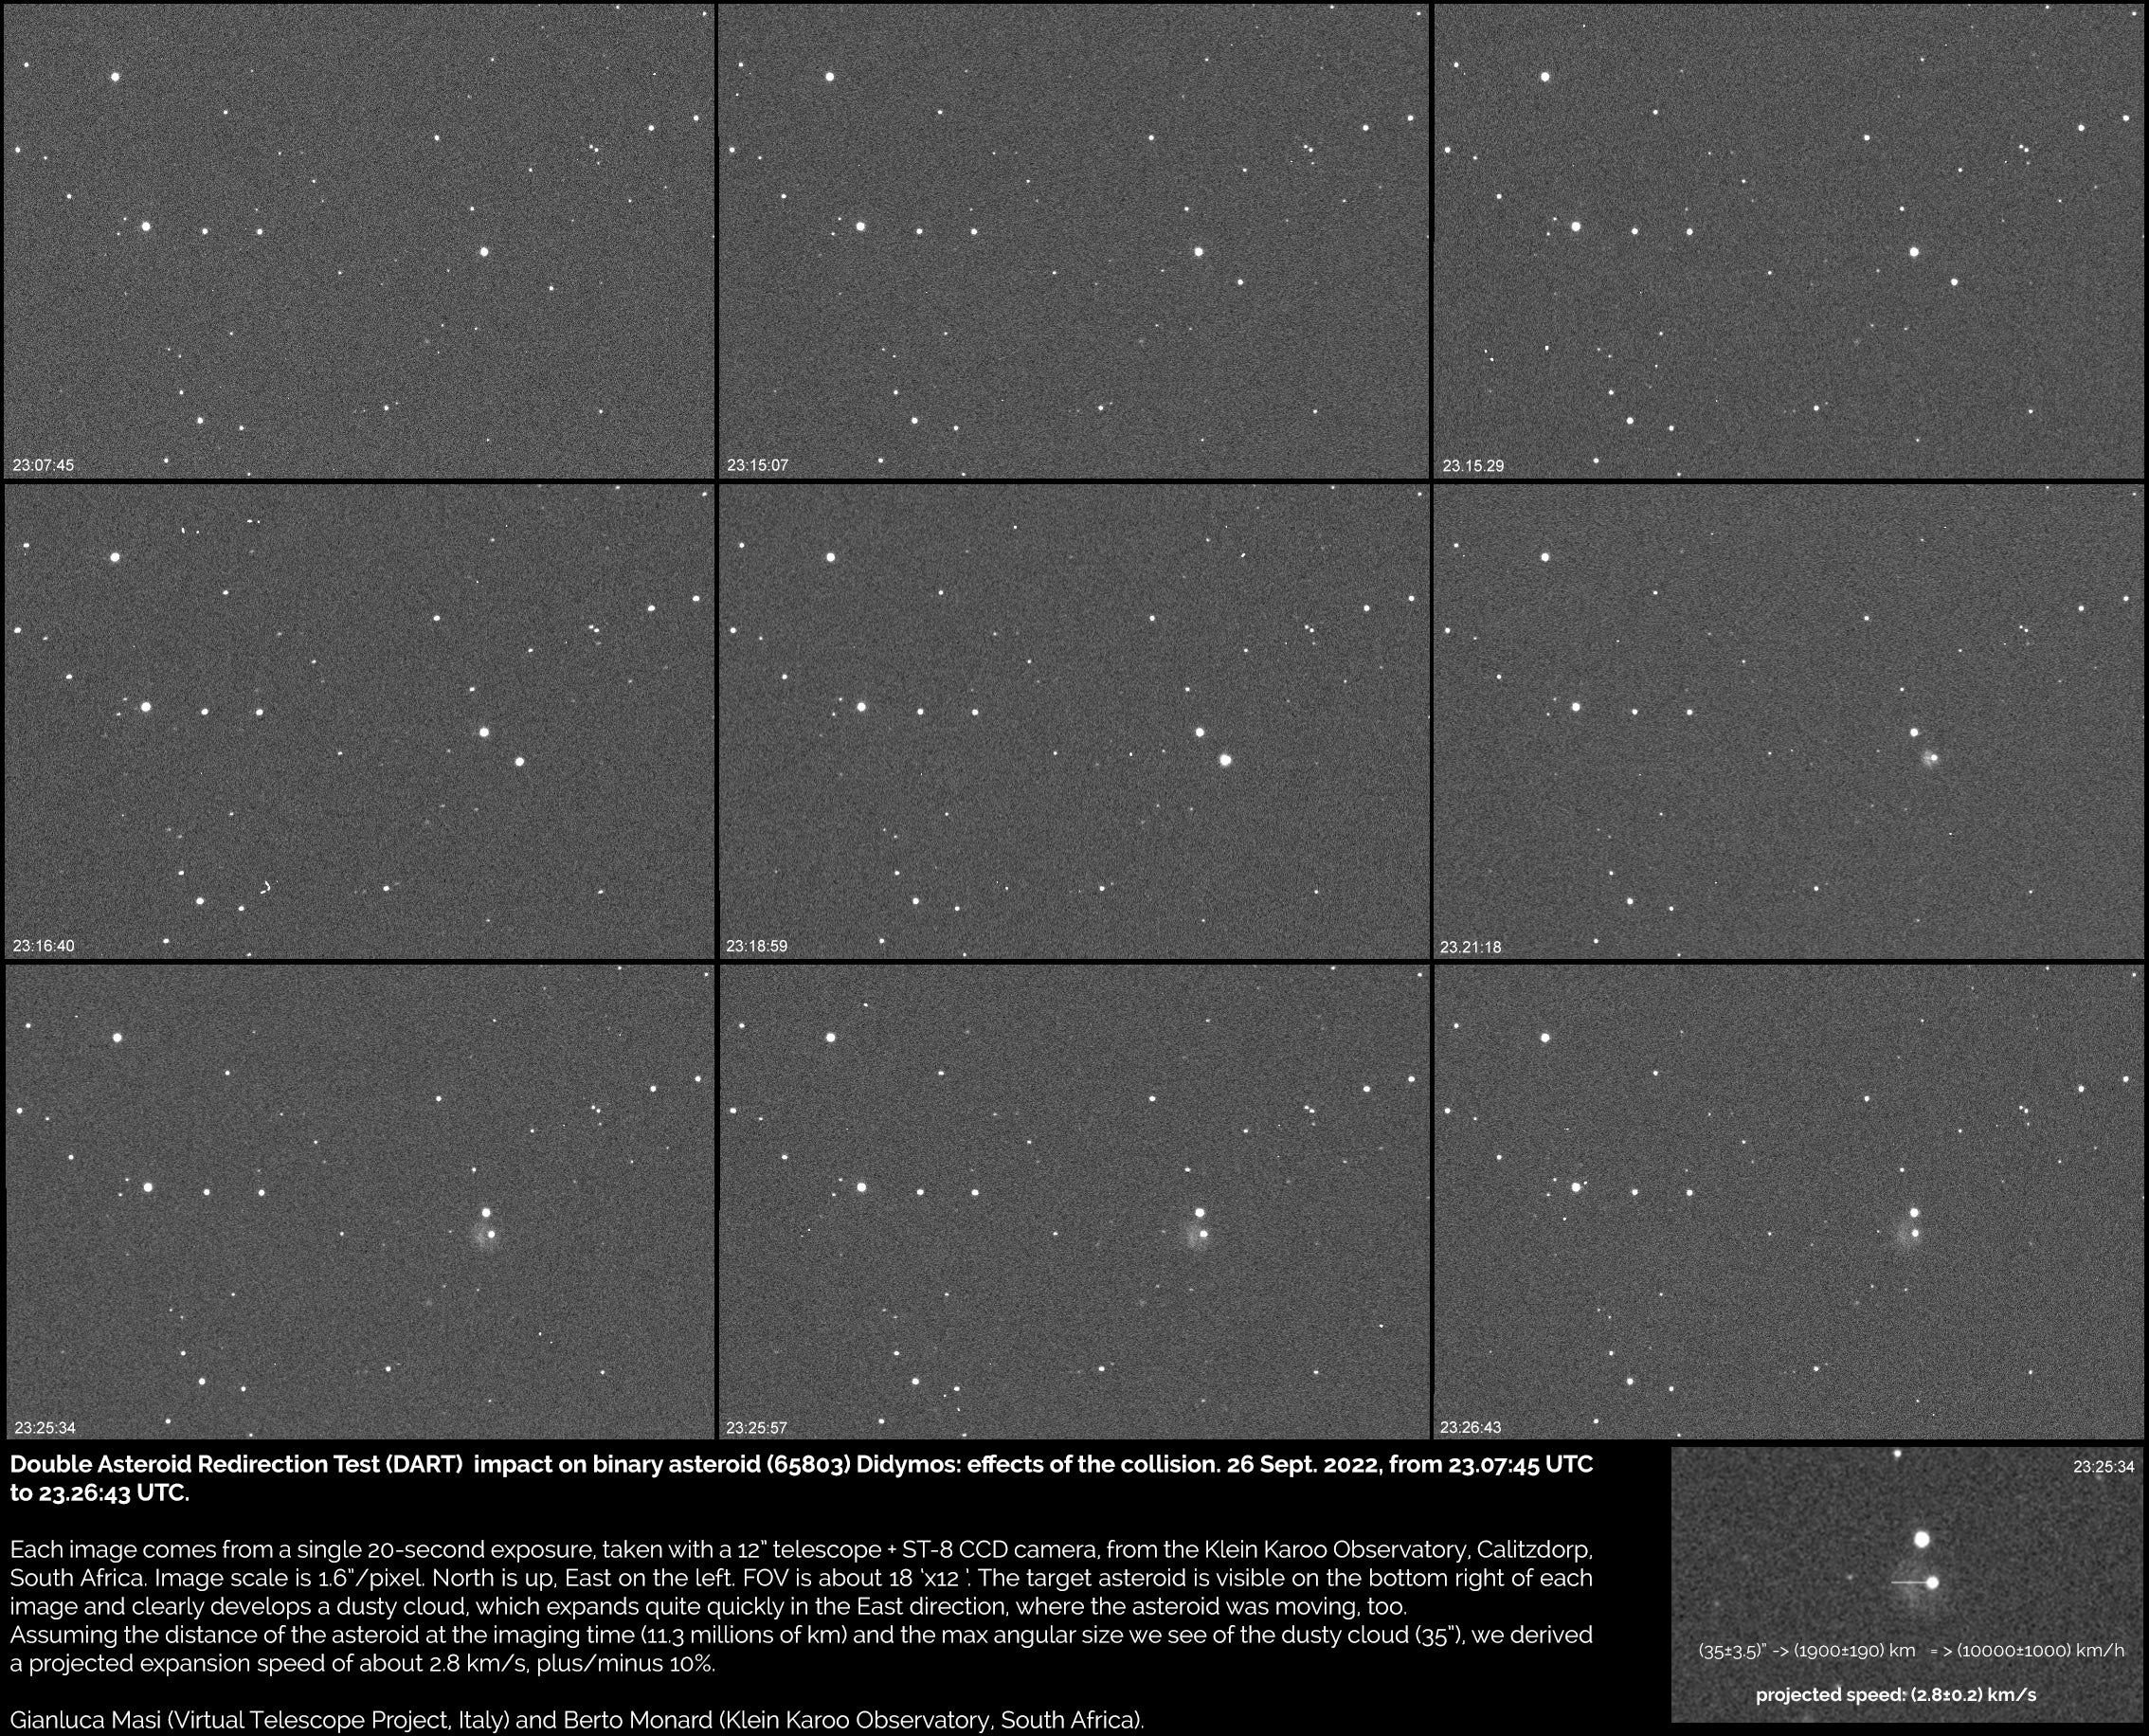 Views of the DART impact, as captured by the Virtual Telescope Project.  (Image: Virtual Telescope Project)